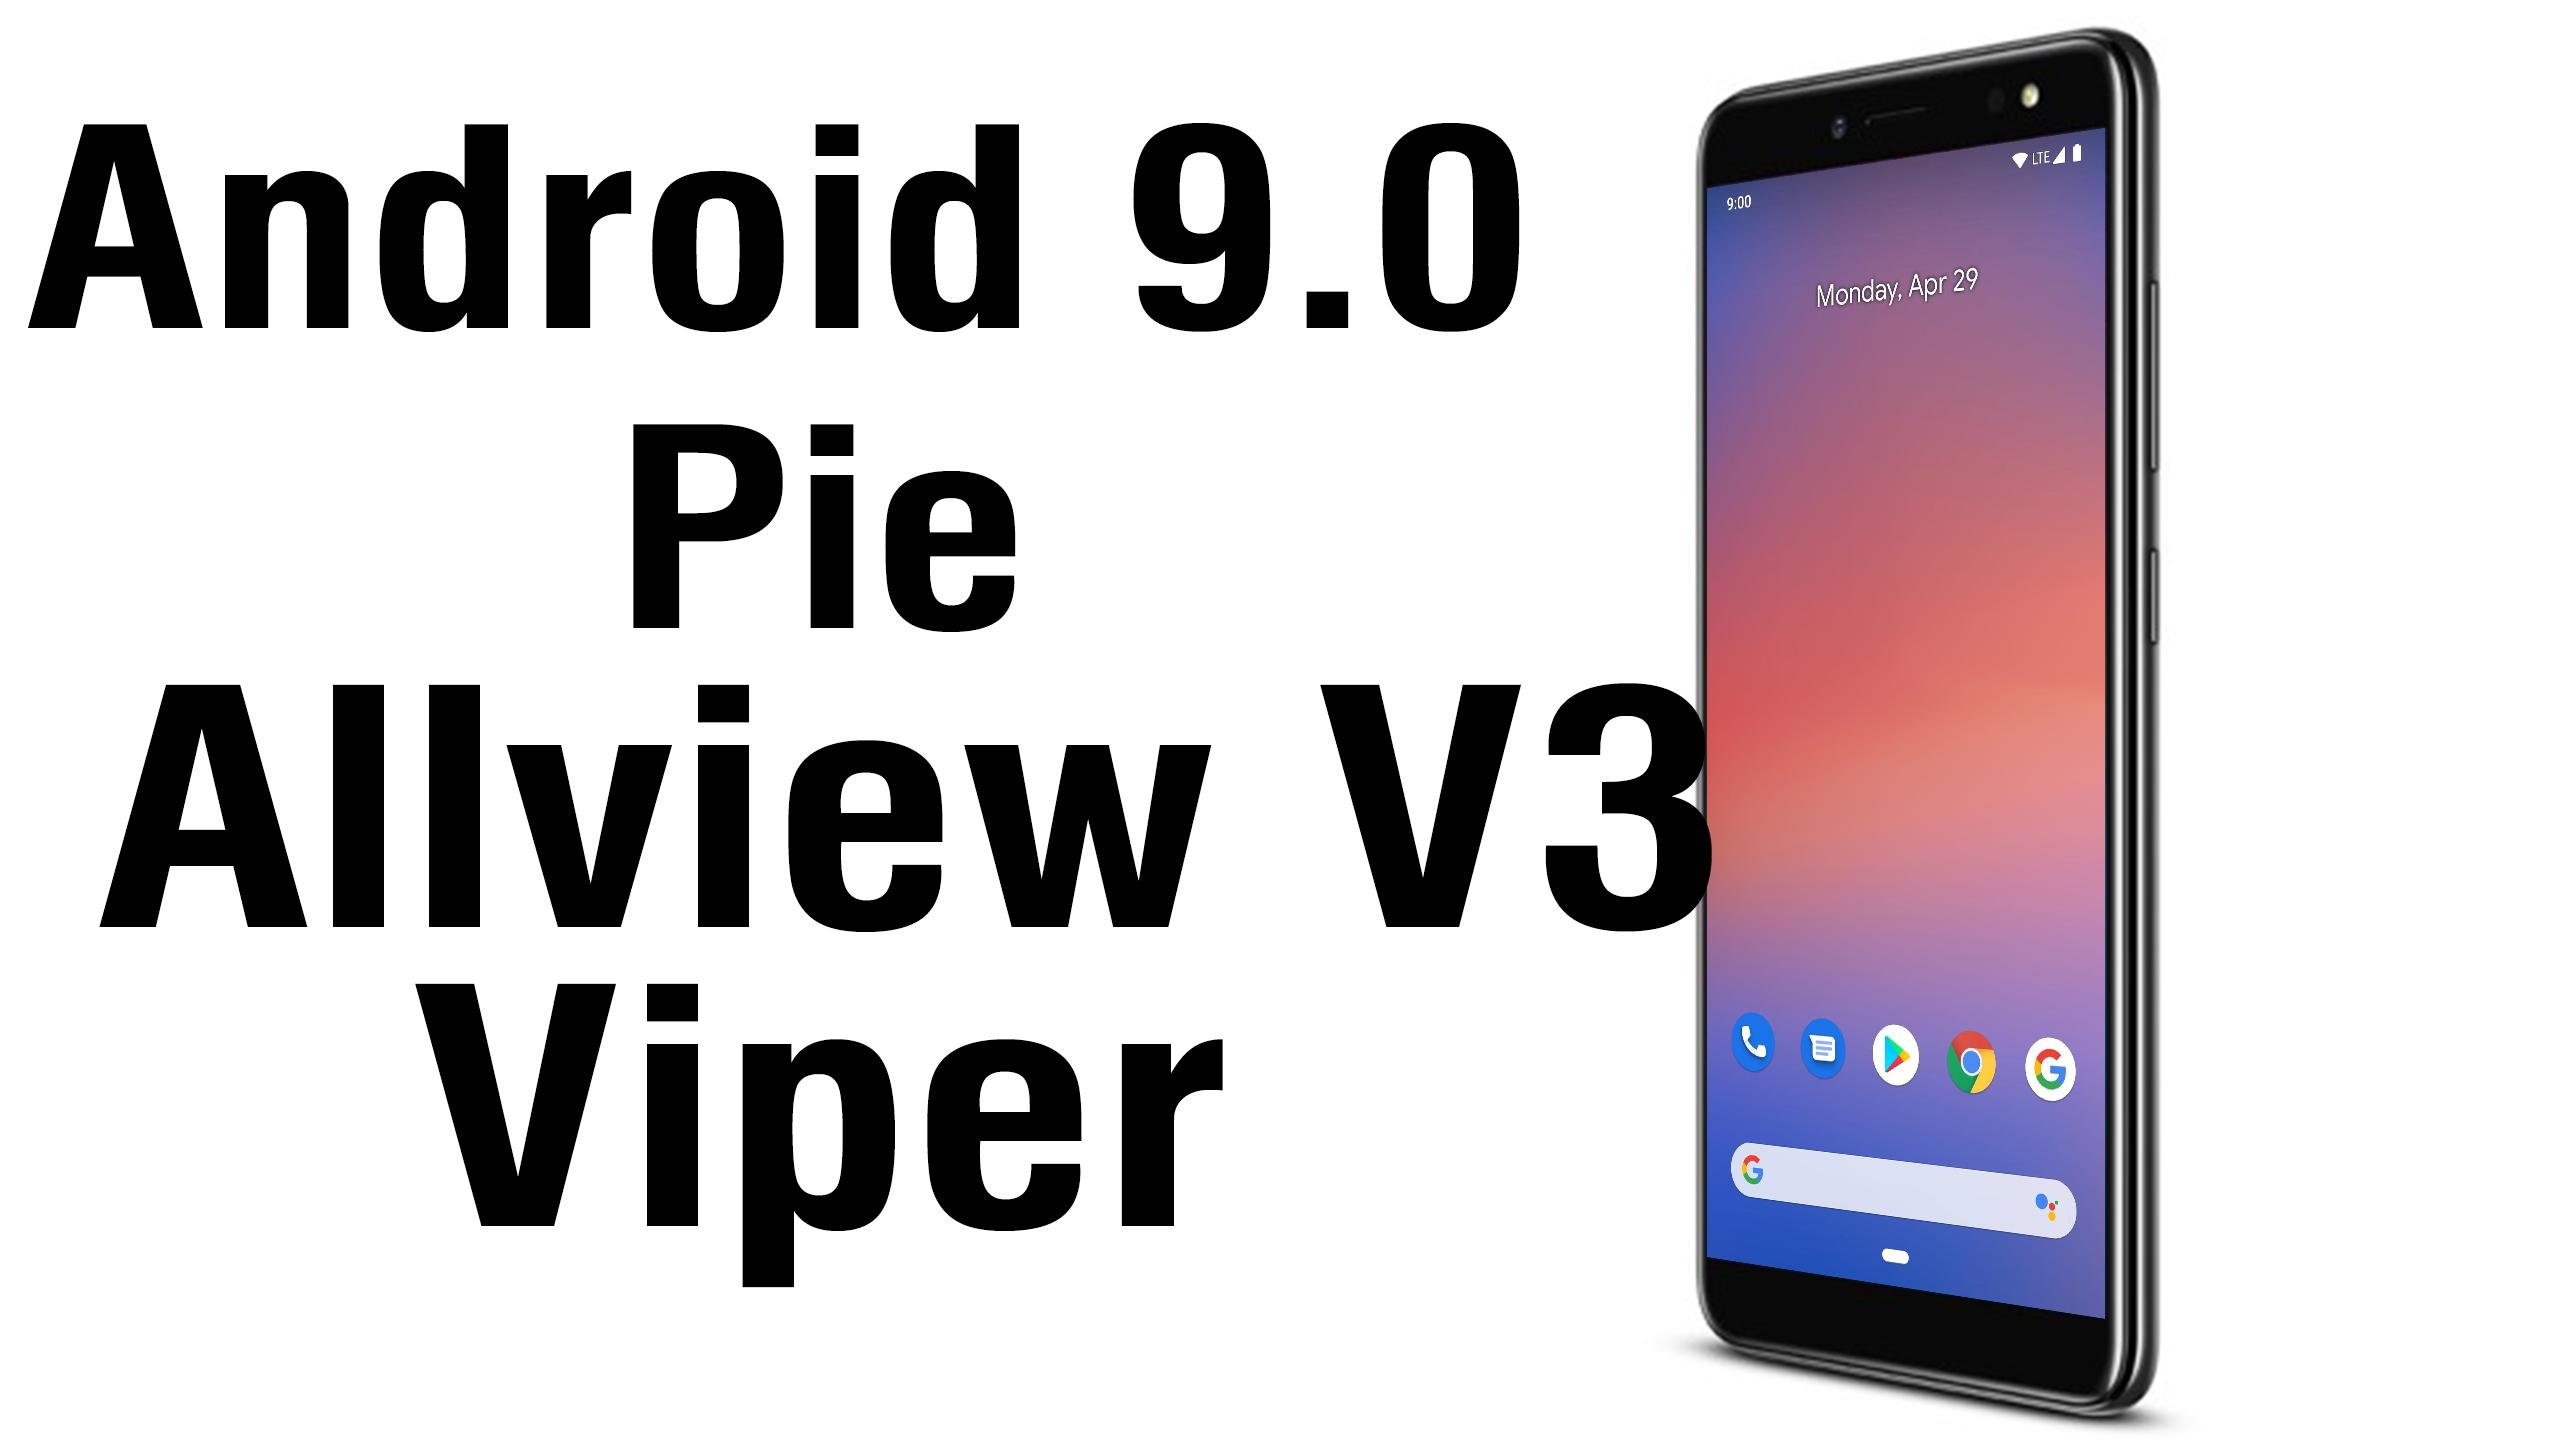 Install Android 9 0 Pie On Allview V3 Viper Pixel Experience Rom How To Guide The Upgrade Guide